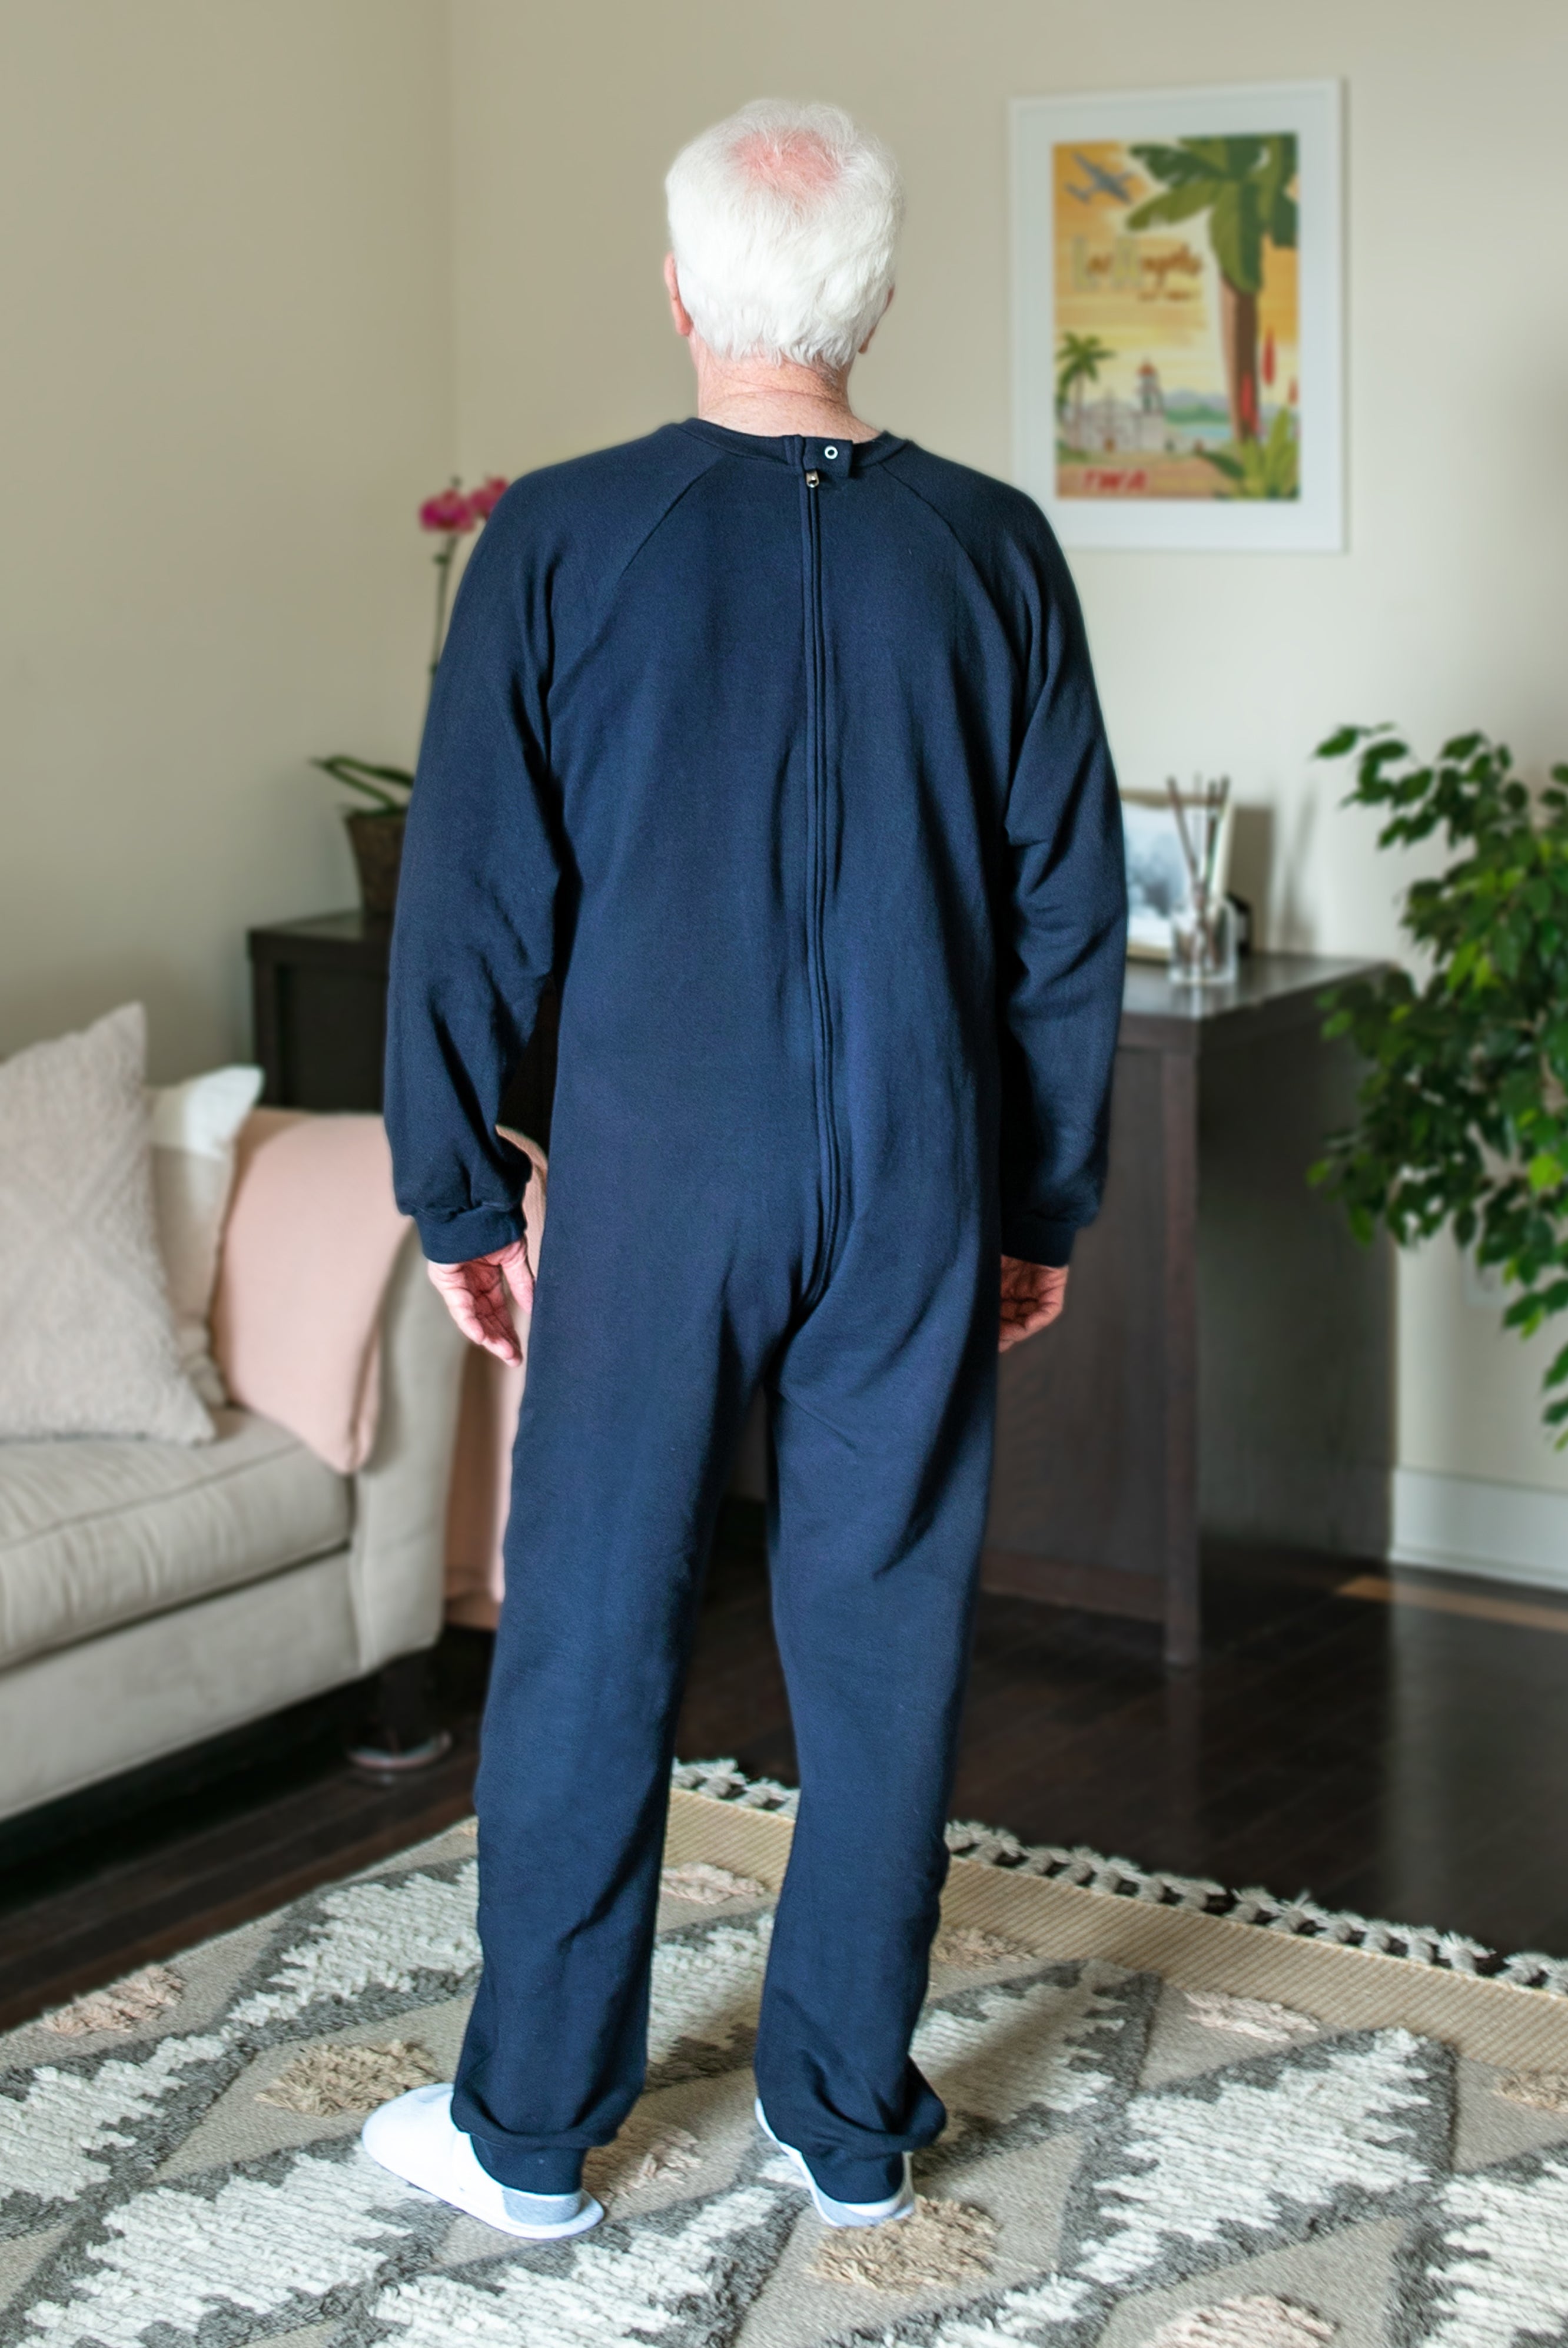 Clothing for Alzheimer's & Dementia - Anti-Strip & Incontinence Onesie/Jumpsuit